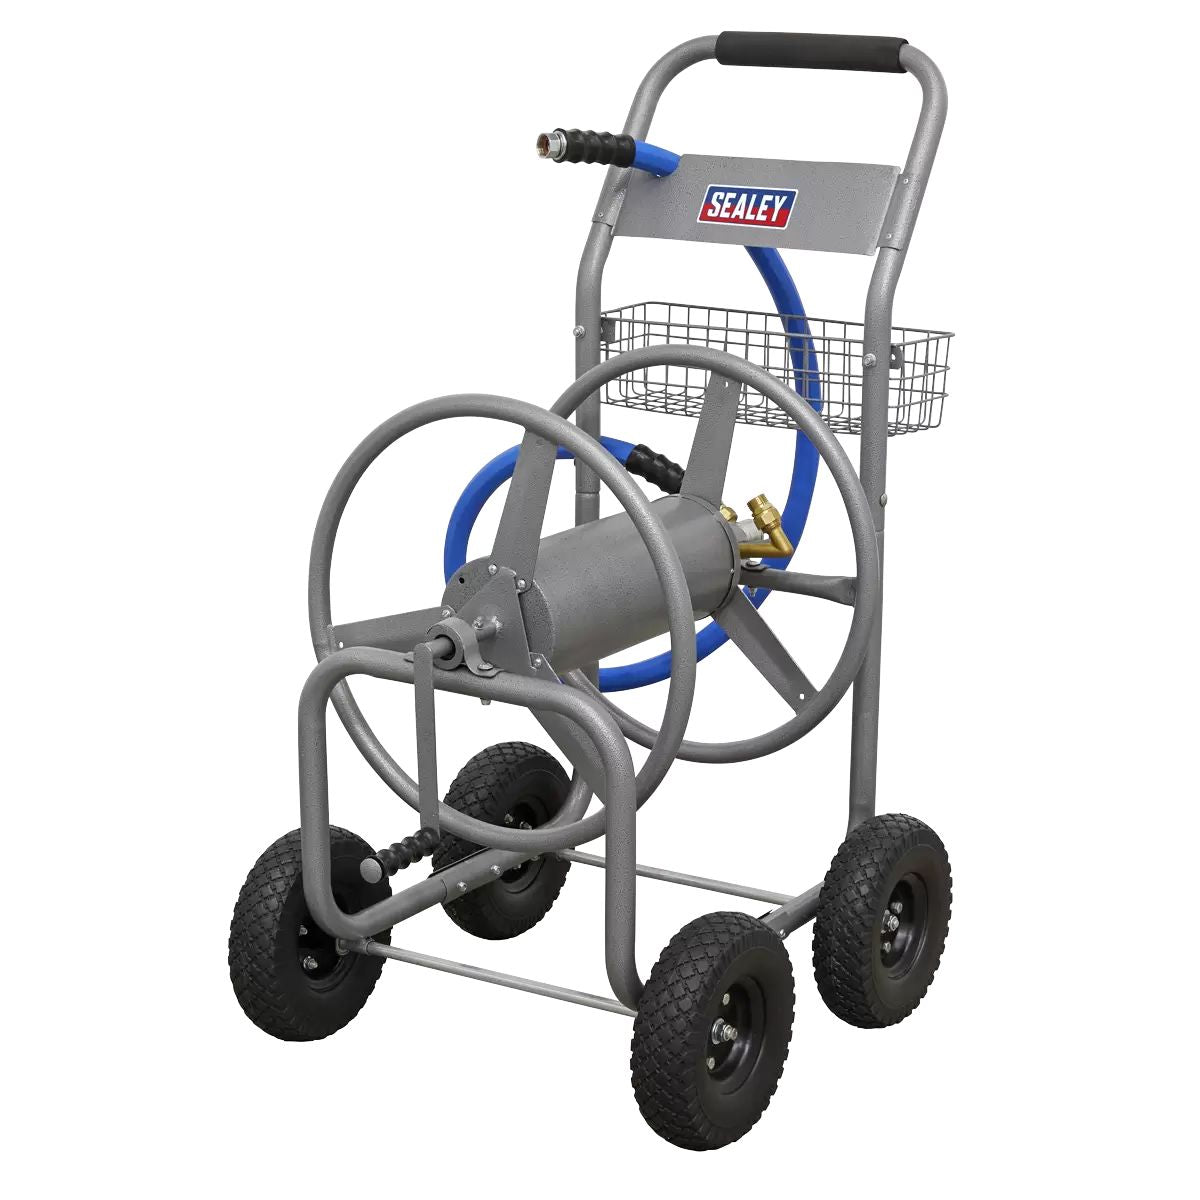 Sealey HRKIT5 Heavy-Duty Hose Reel Cart with 5m Hot & Cold Rubber Water Hose